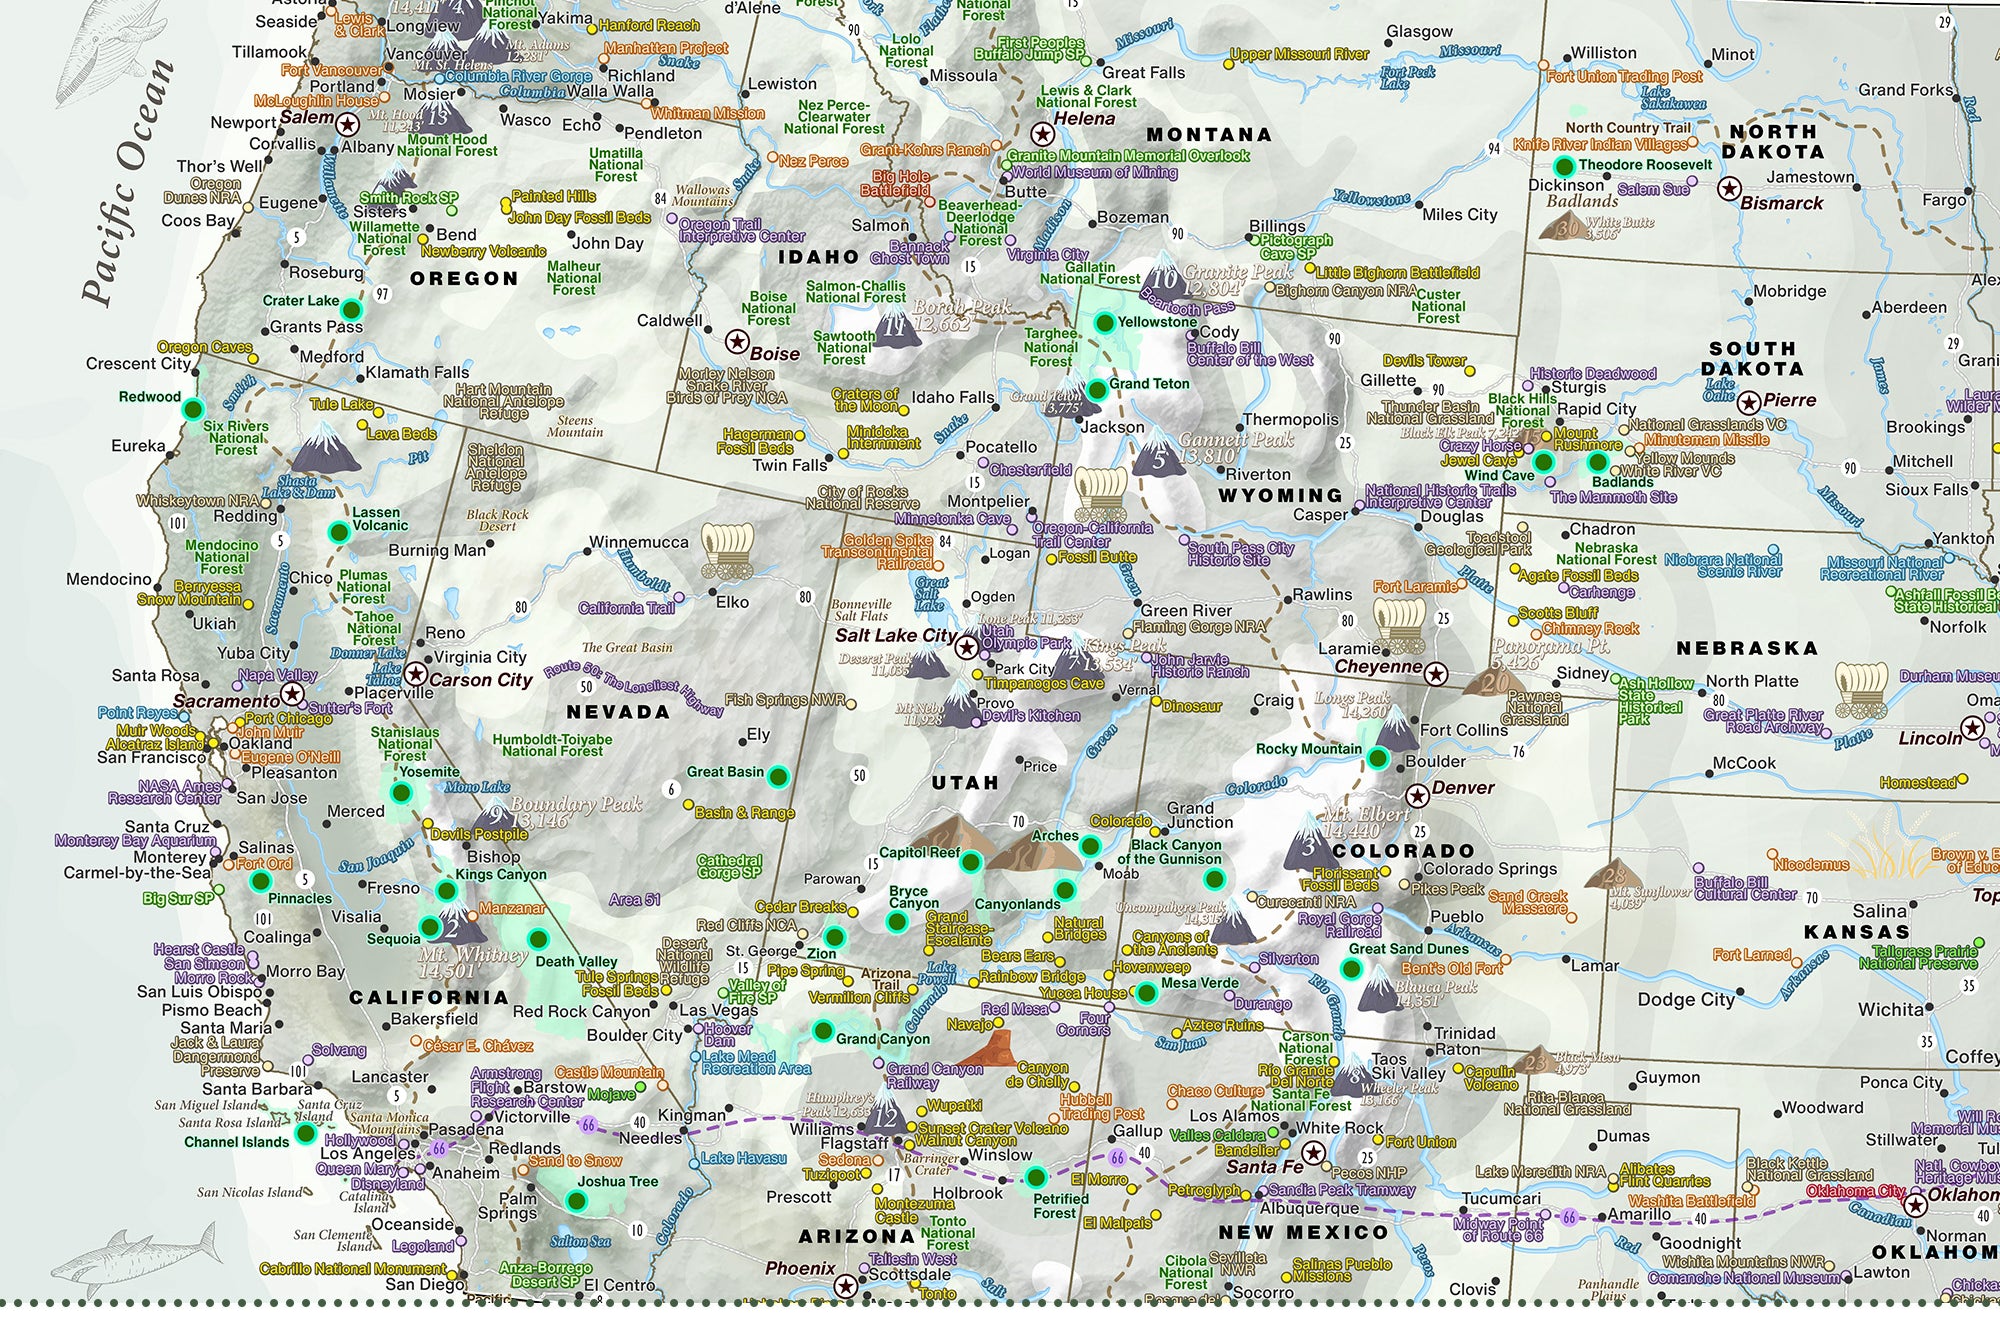 map includes over 600 national parks sites